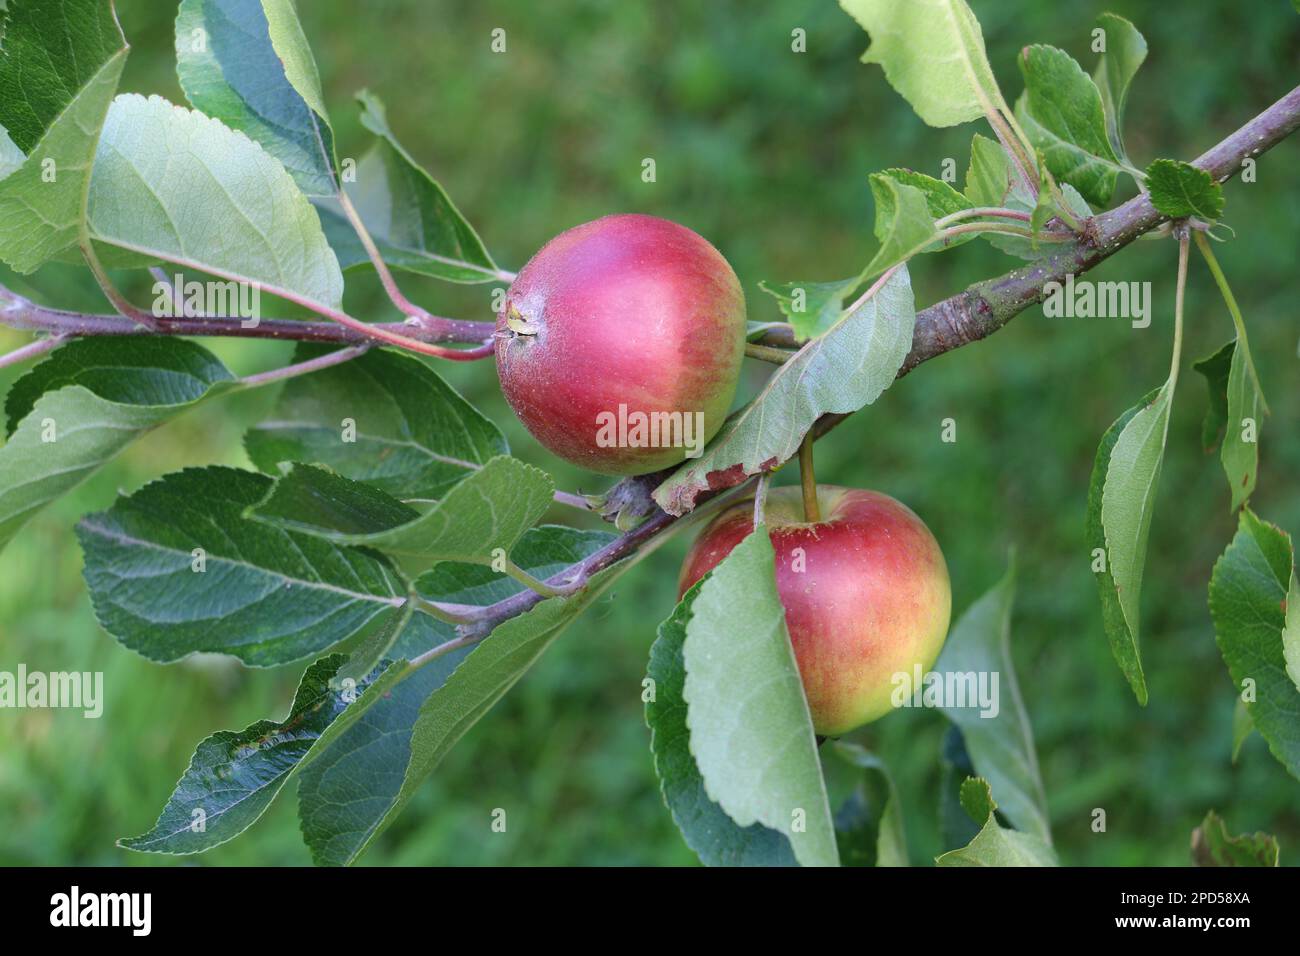 Two ripe Discovery apples, Malus domestica fruit, on an apple tree branch in late summer, Shropshire, England. Stock Photo